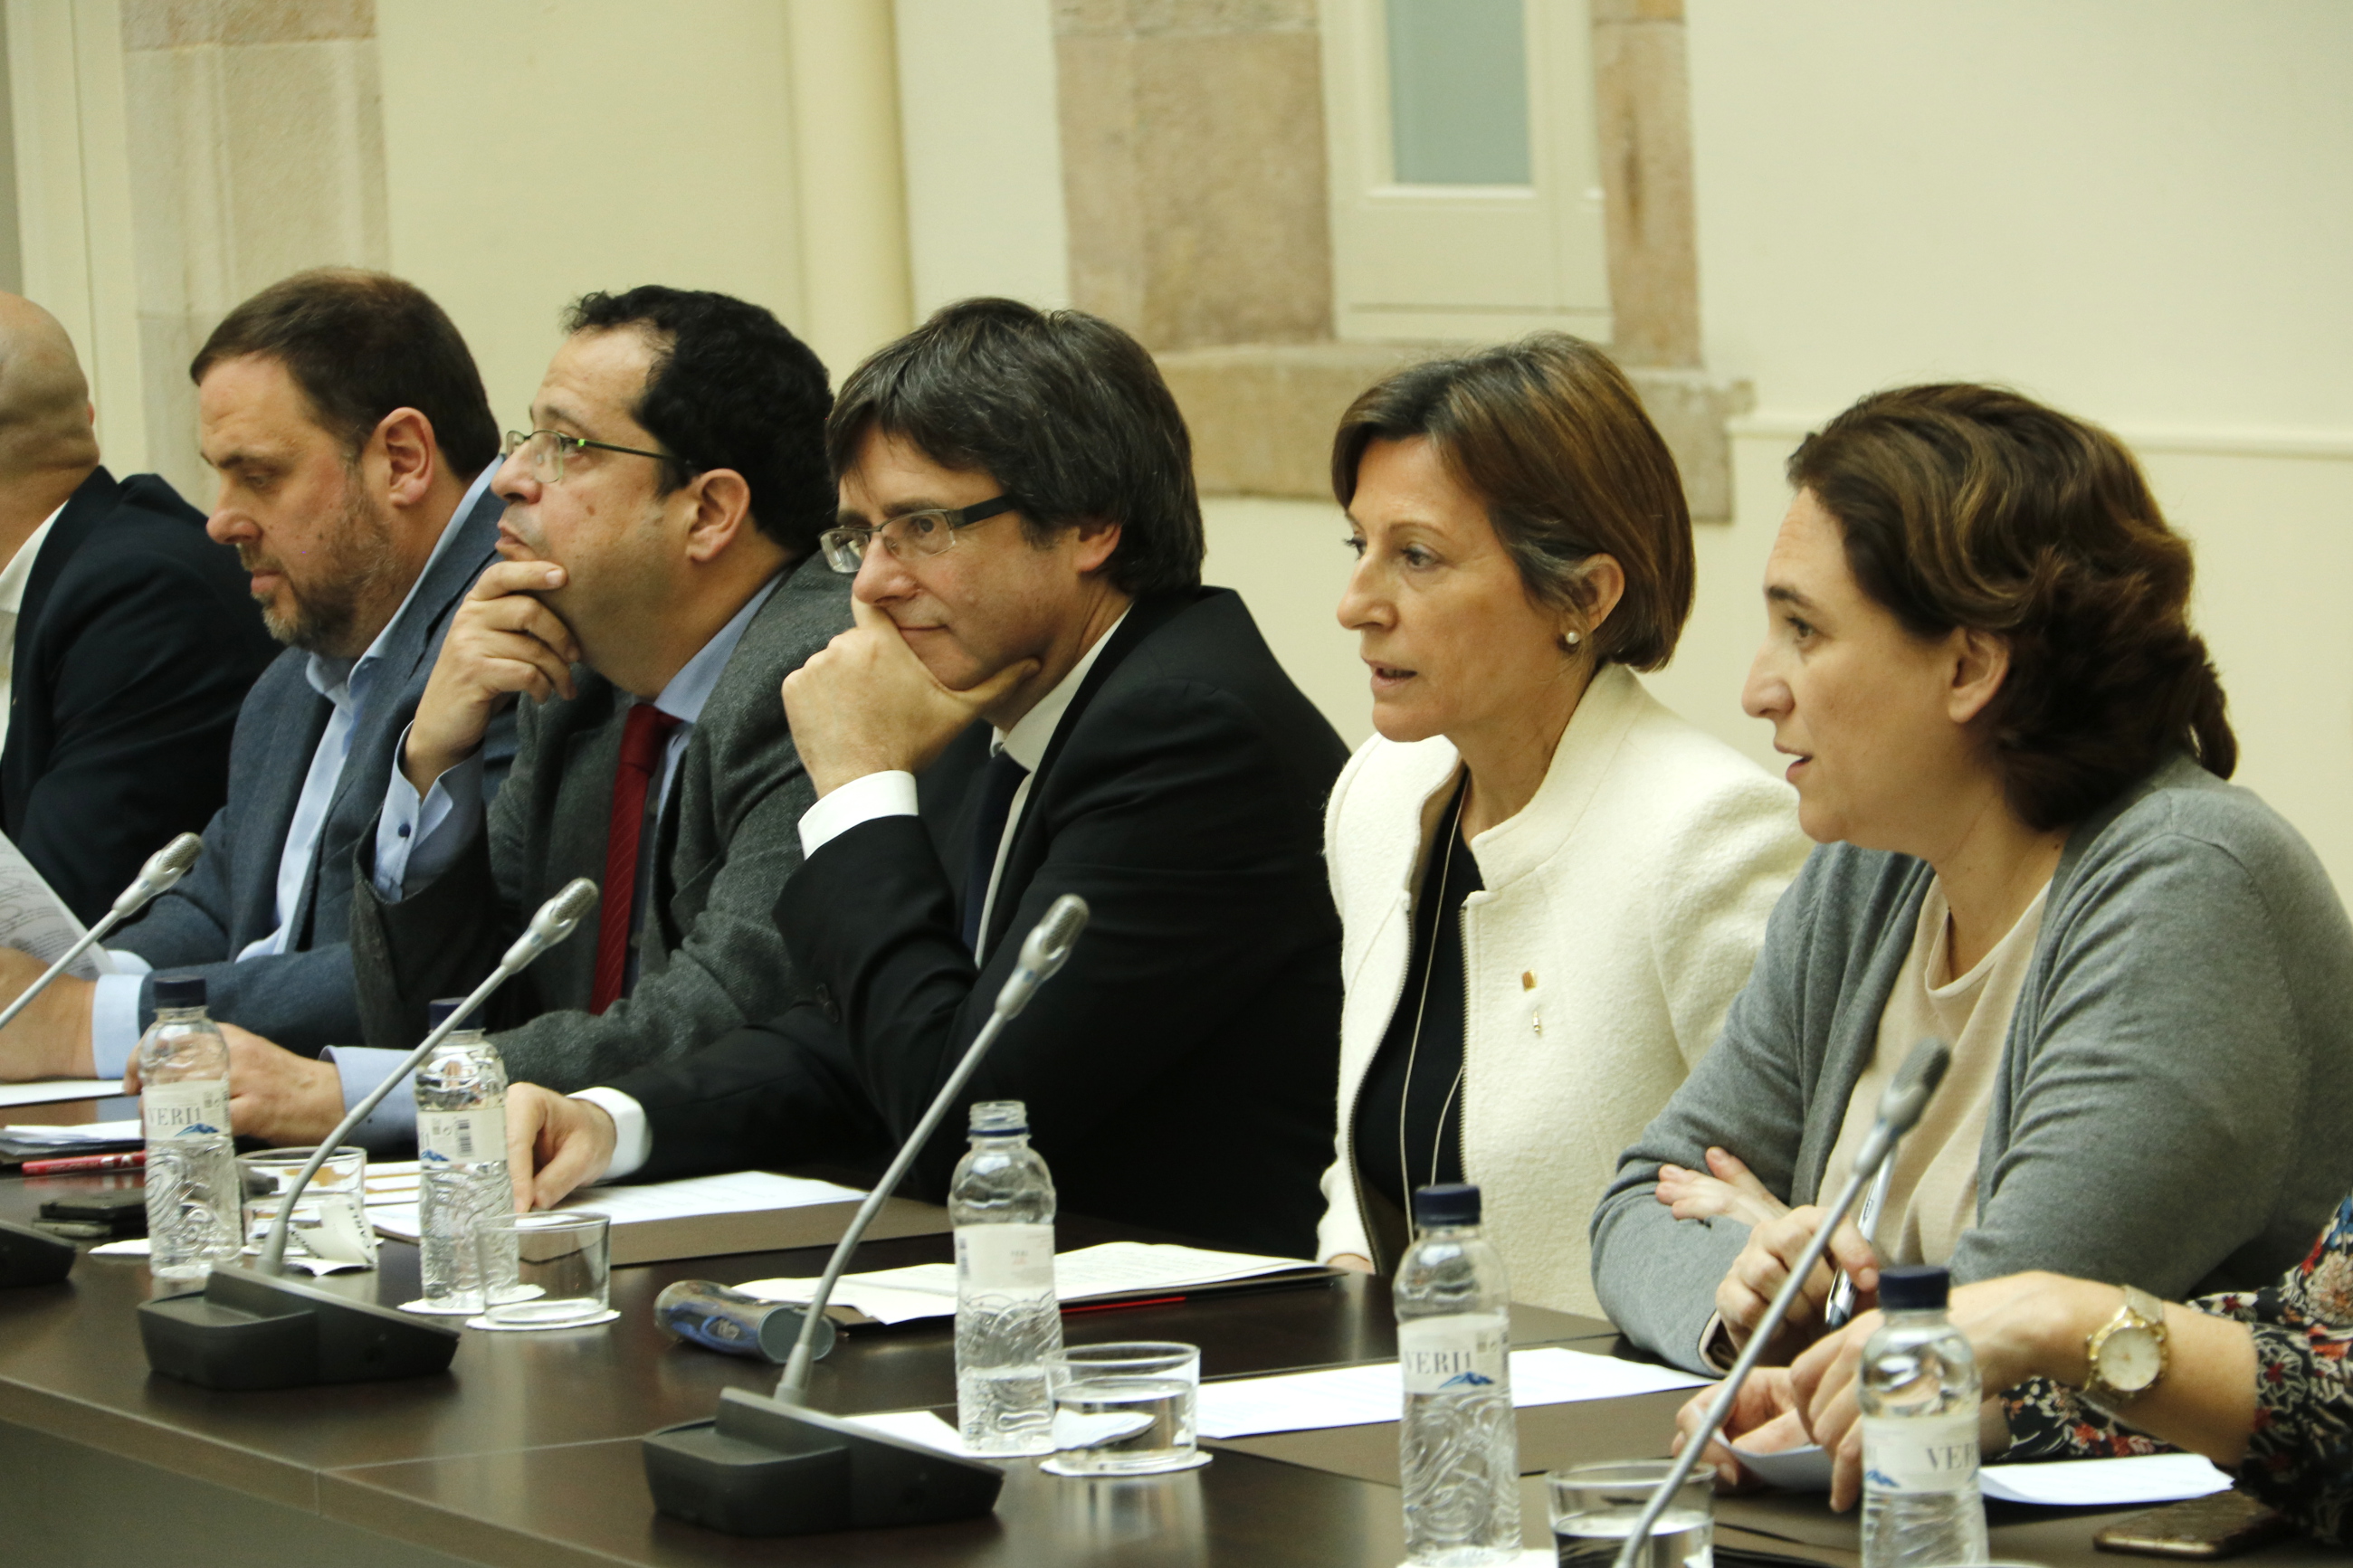 Catalan vice president, Oriol Junqueras; president of the National Pact for the Referendum, Joan Ignasi Elena; Catalan president, Carles Puigdemont; Catalan parliament president, Carme Forcadell; and Barcelona mayor, Ada Colau